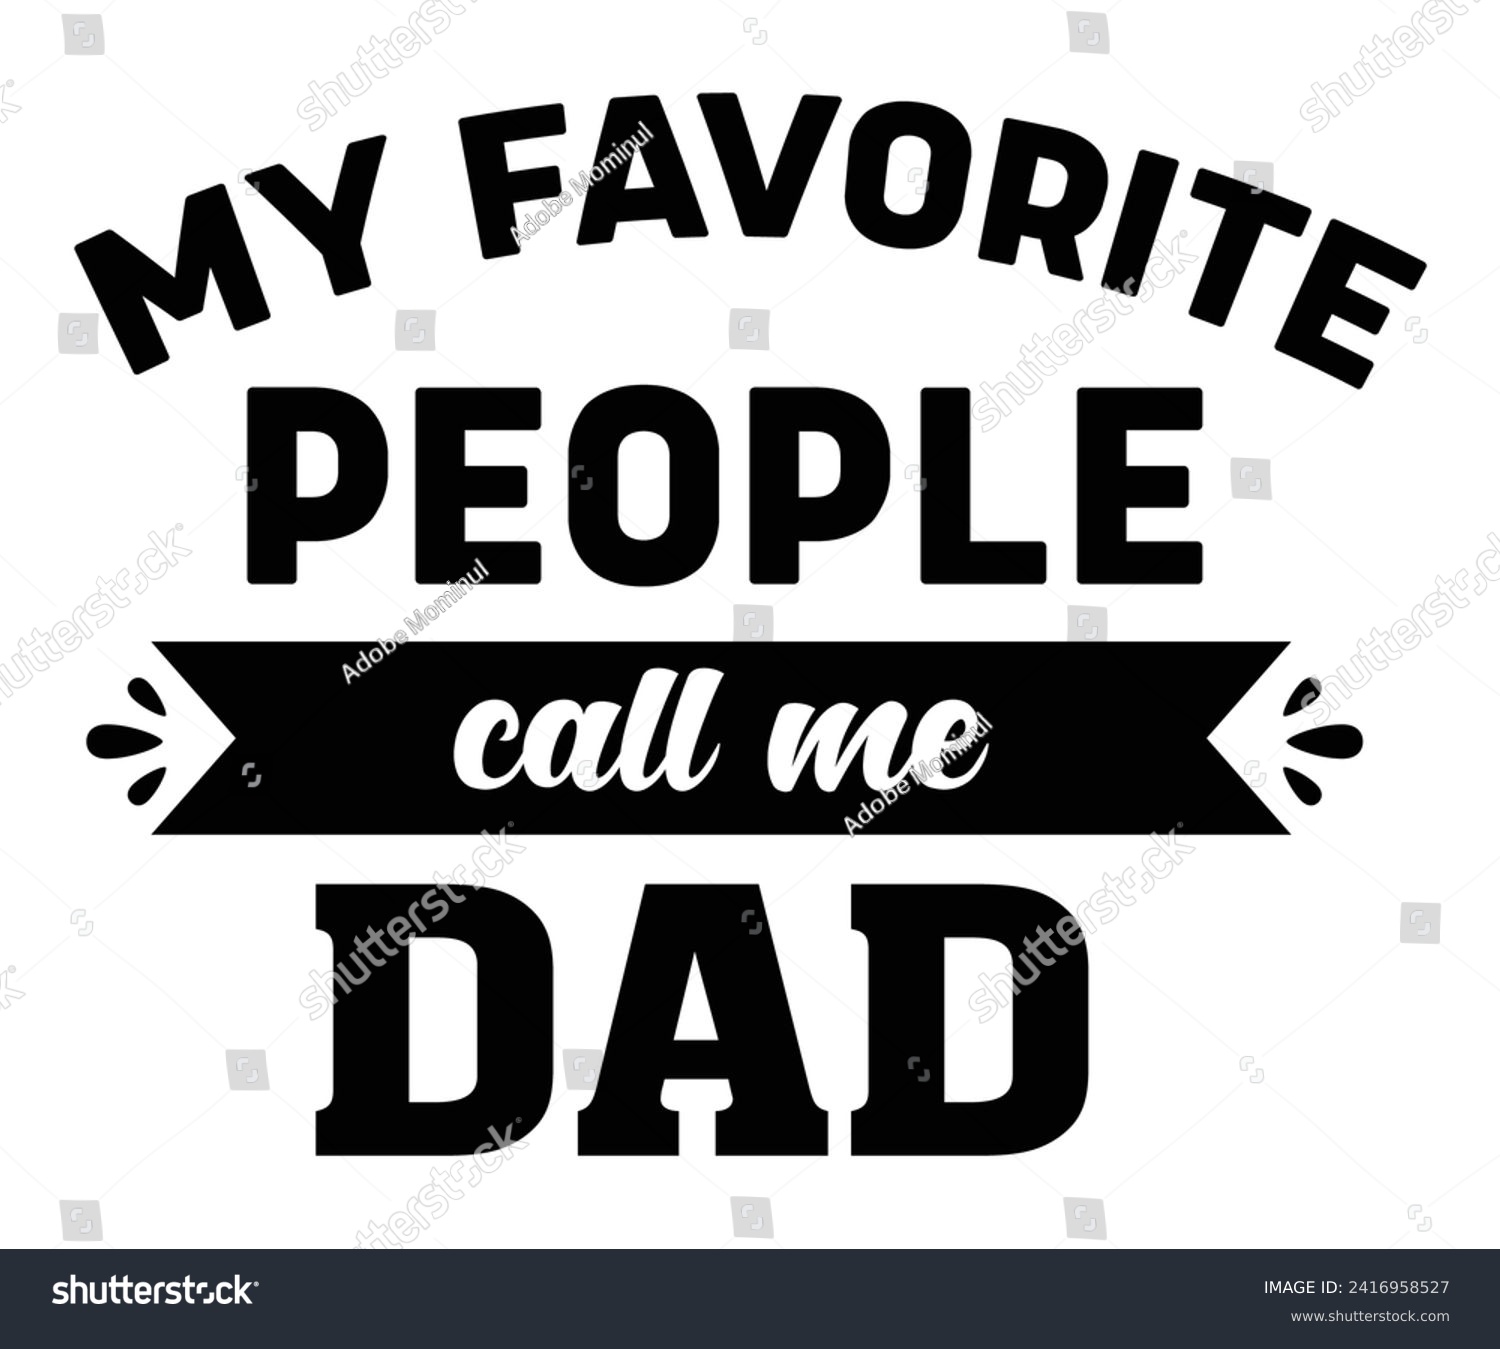 SVG of My Favorite People Call Me Dad Svg,Father's Day Svg,Papa svg,Grandpa Svg,Father's Day Saying Qoutes,Dad Svg,Funny Father, Gift For Dad Svg,Daddy Svg,Family Svg,T shirt Design,Svg Cut File,Typography svg